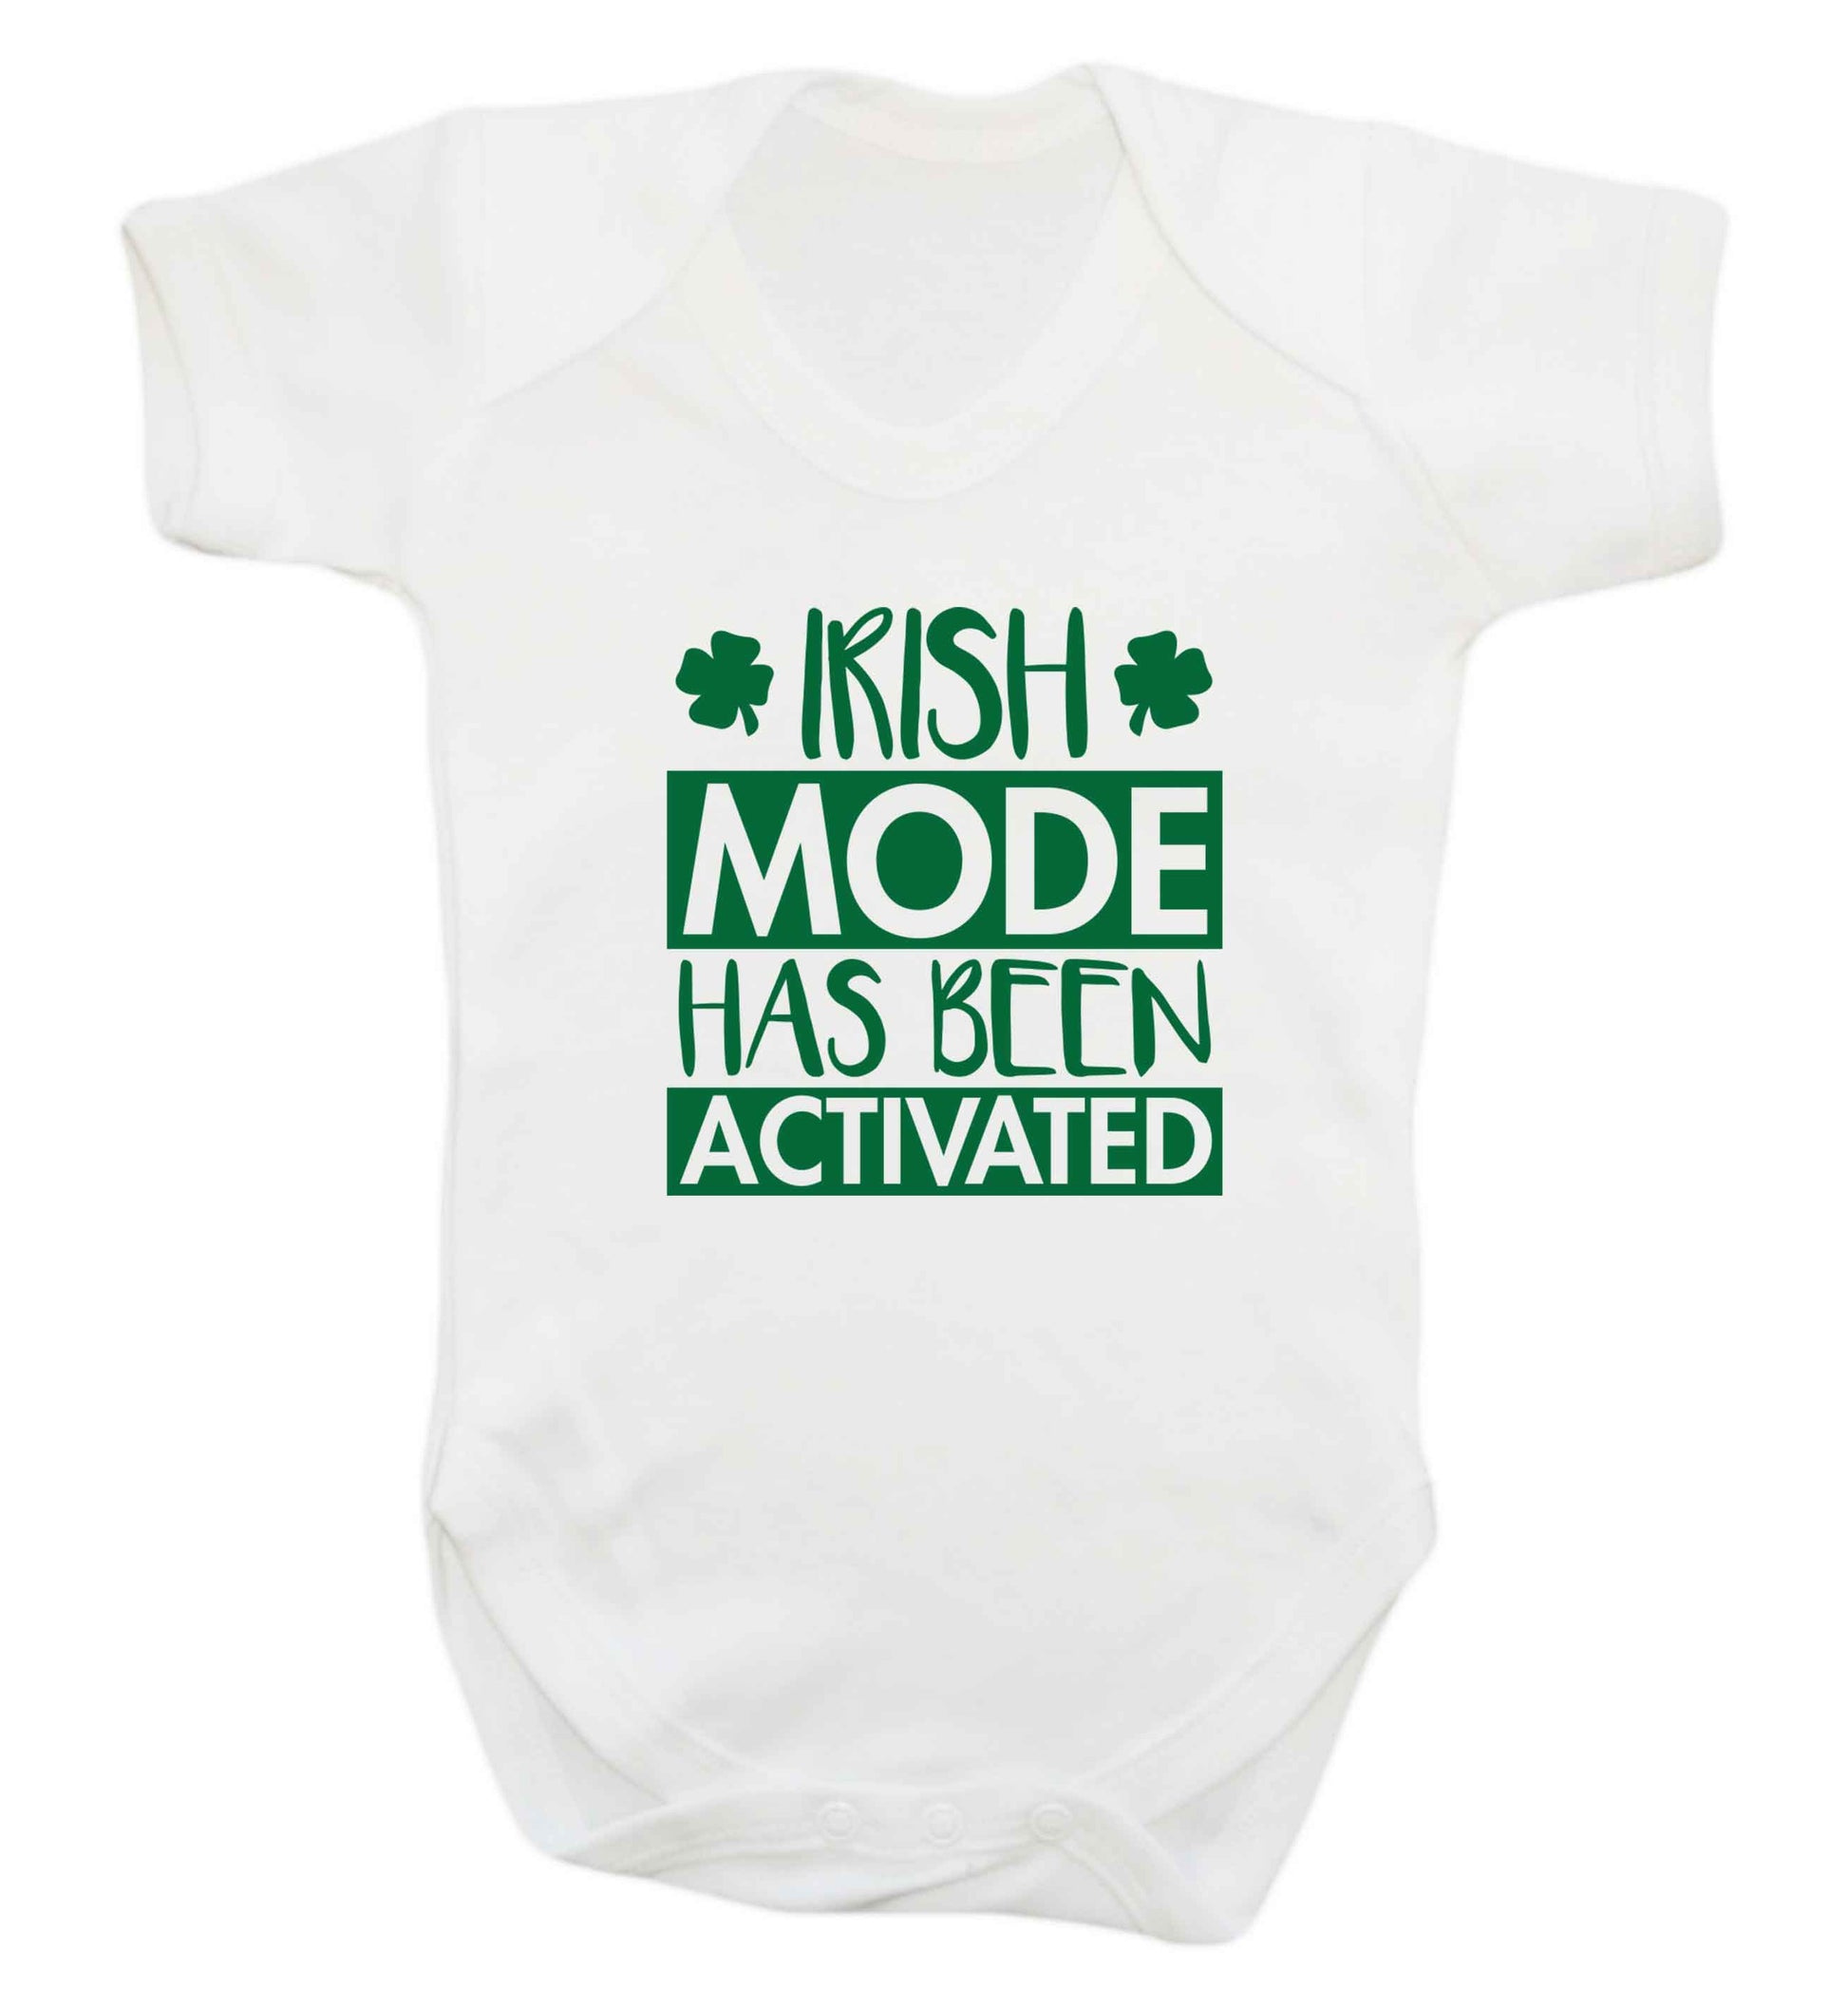 Irish mode has been activated baby vest white 18-24 months